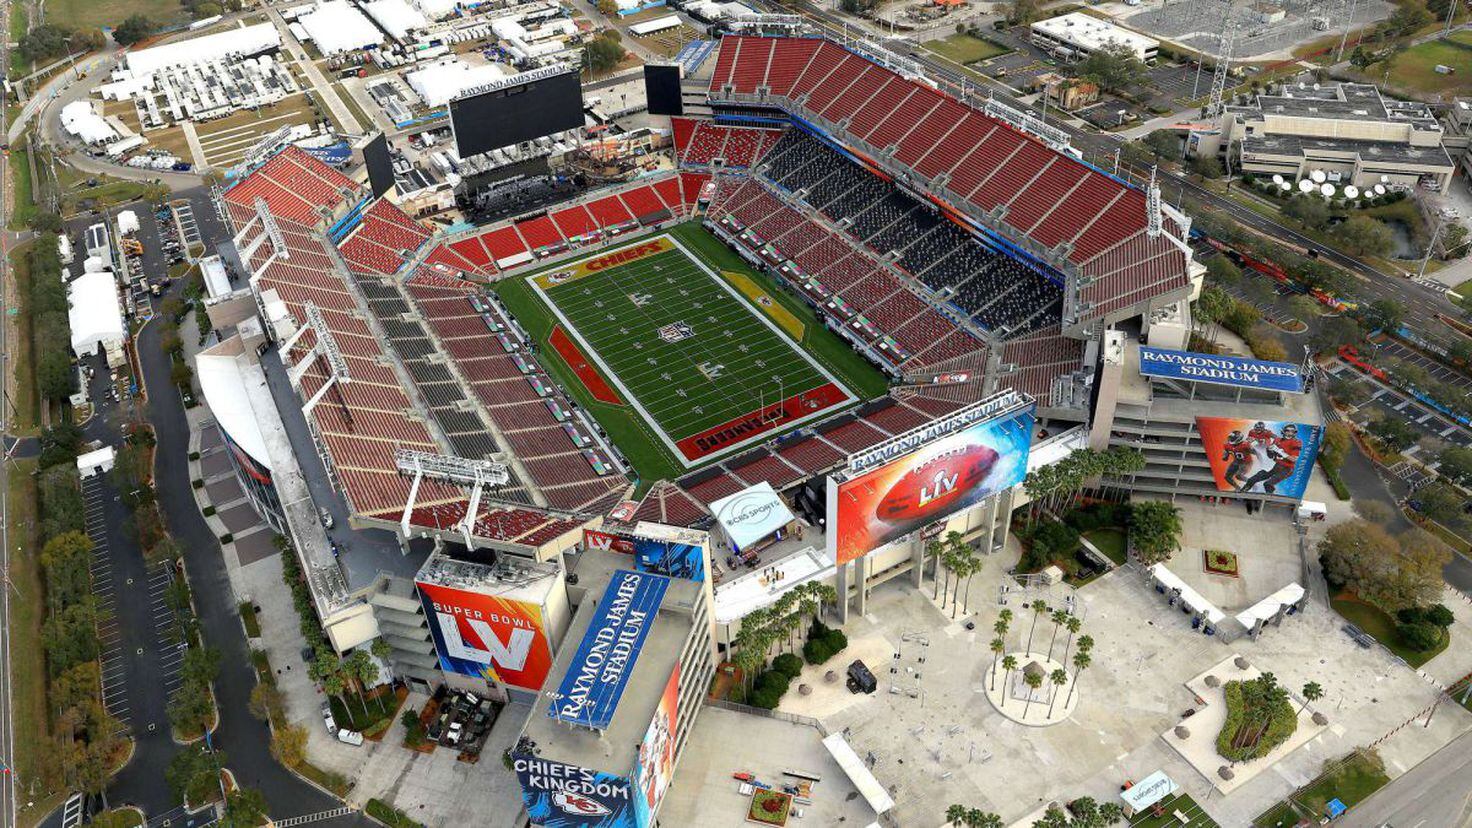 How many fans are at the Raymond James Stadium for the Super Bowl